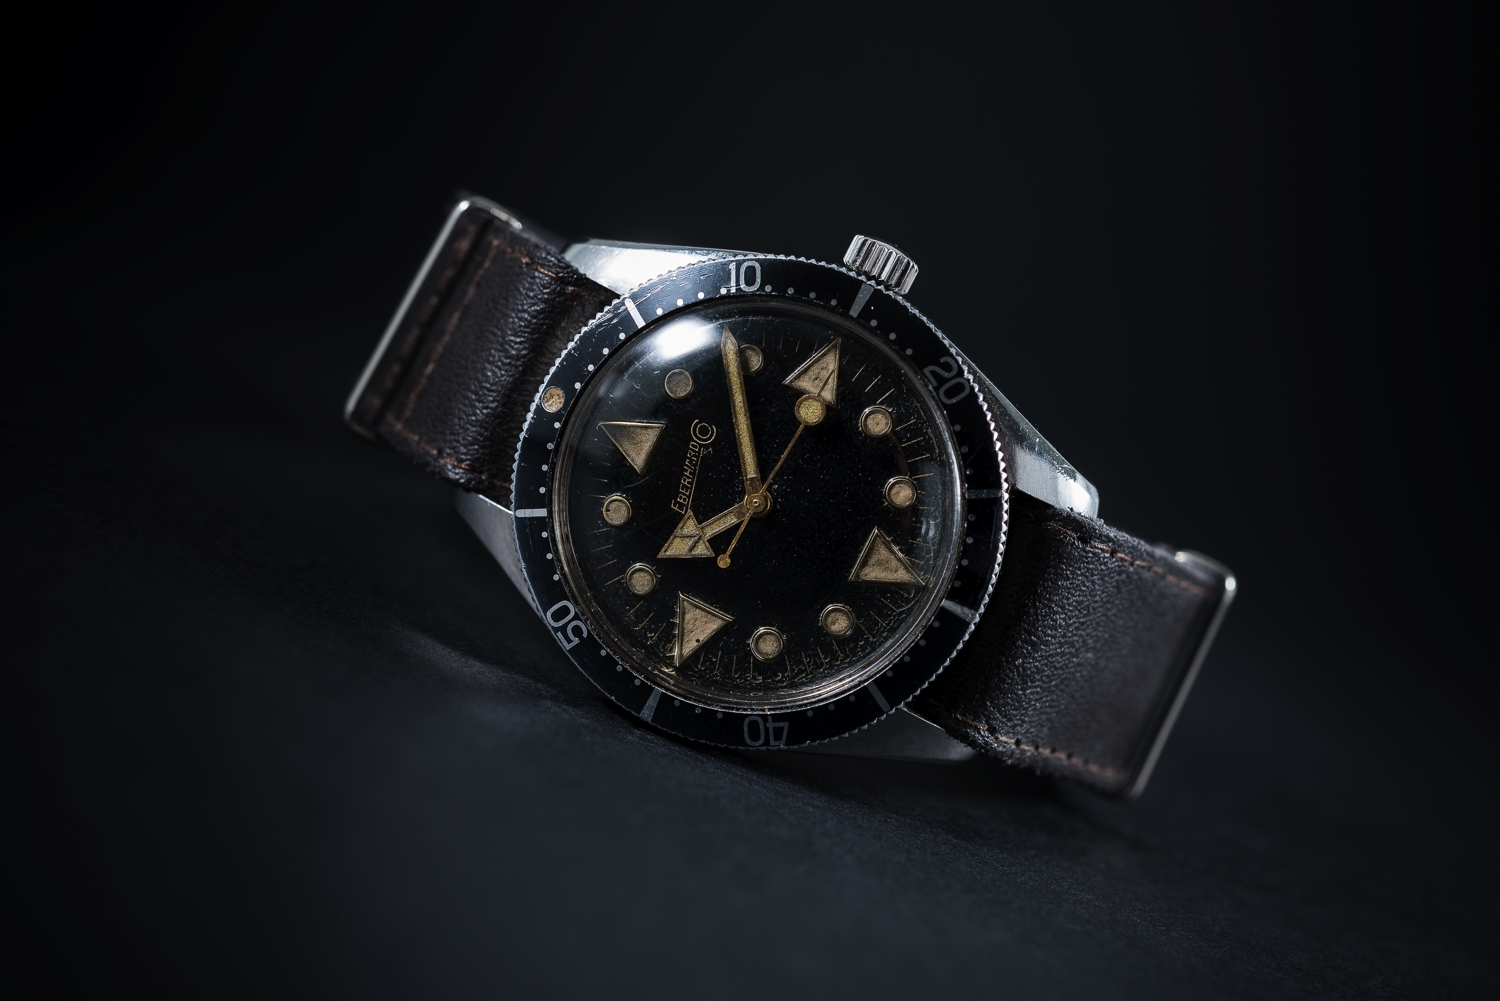 A RARE GENTLEMAN'S STAINLESS STEEL EBERHARD & CO AUTOMATIC DIVERS WRIST WATCH CIRCA 1961, NUMBER 247 - Image 2 of 9